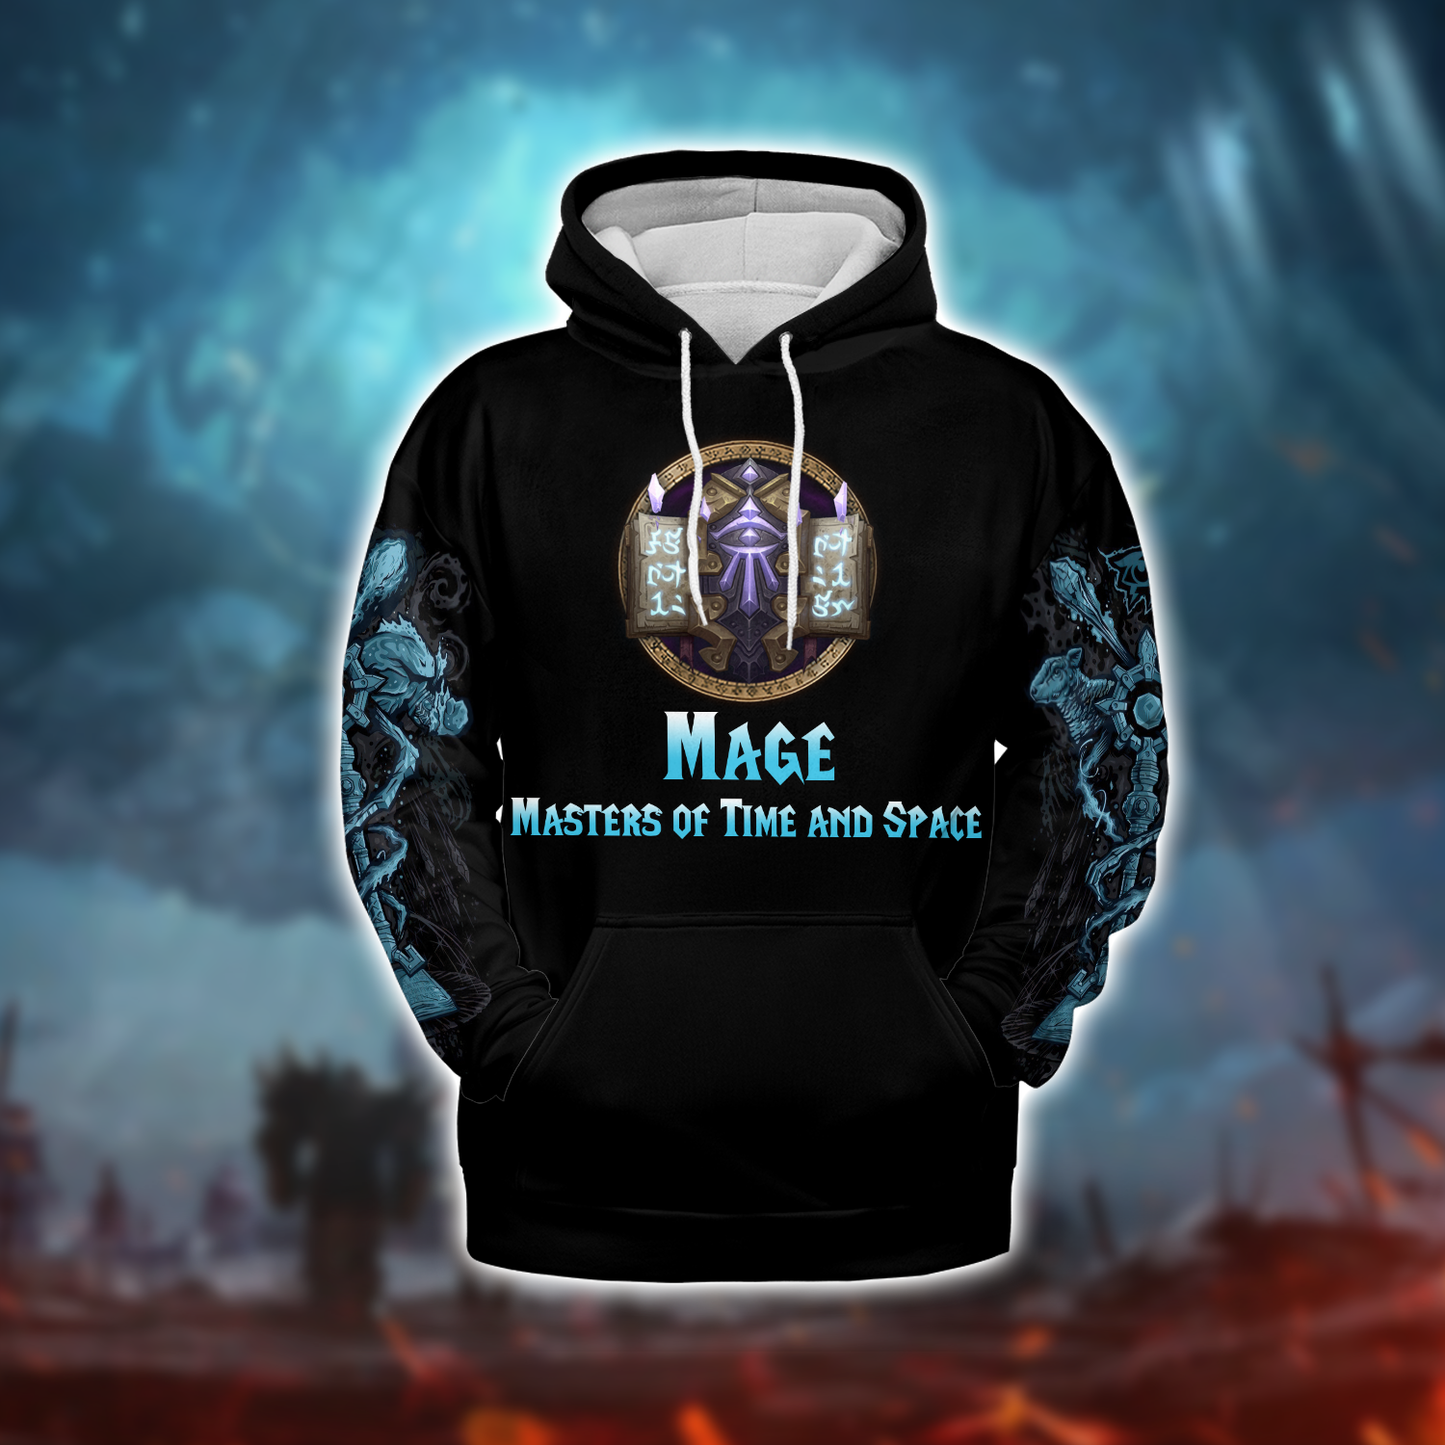 Mage - Masters of Time and Space - WoW Class V5 AOP Hoodie